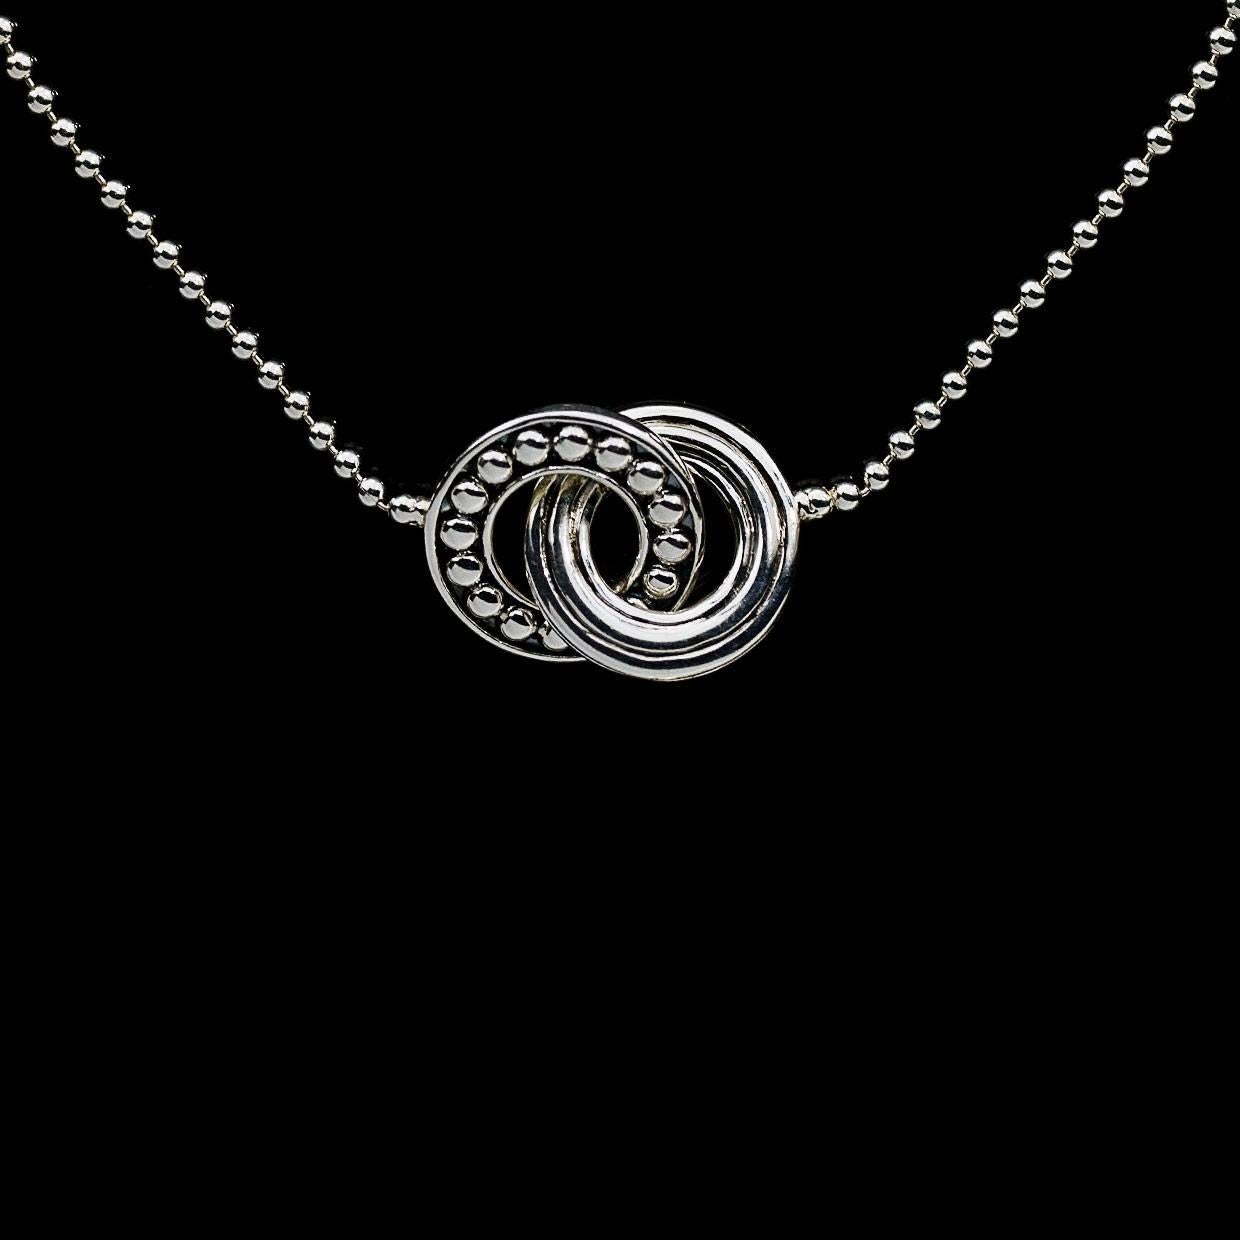 enso necklace